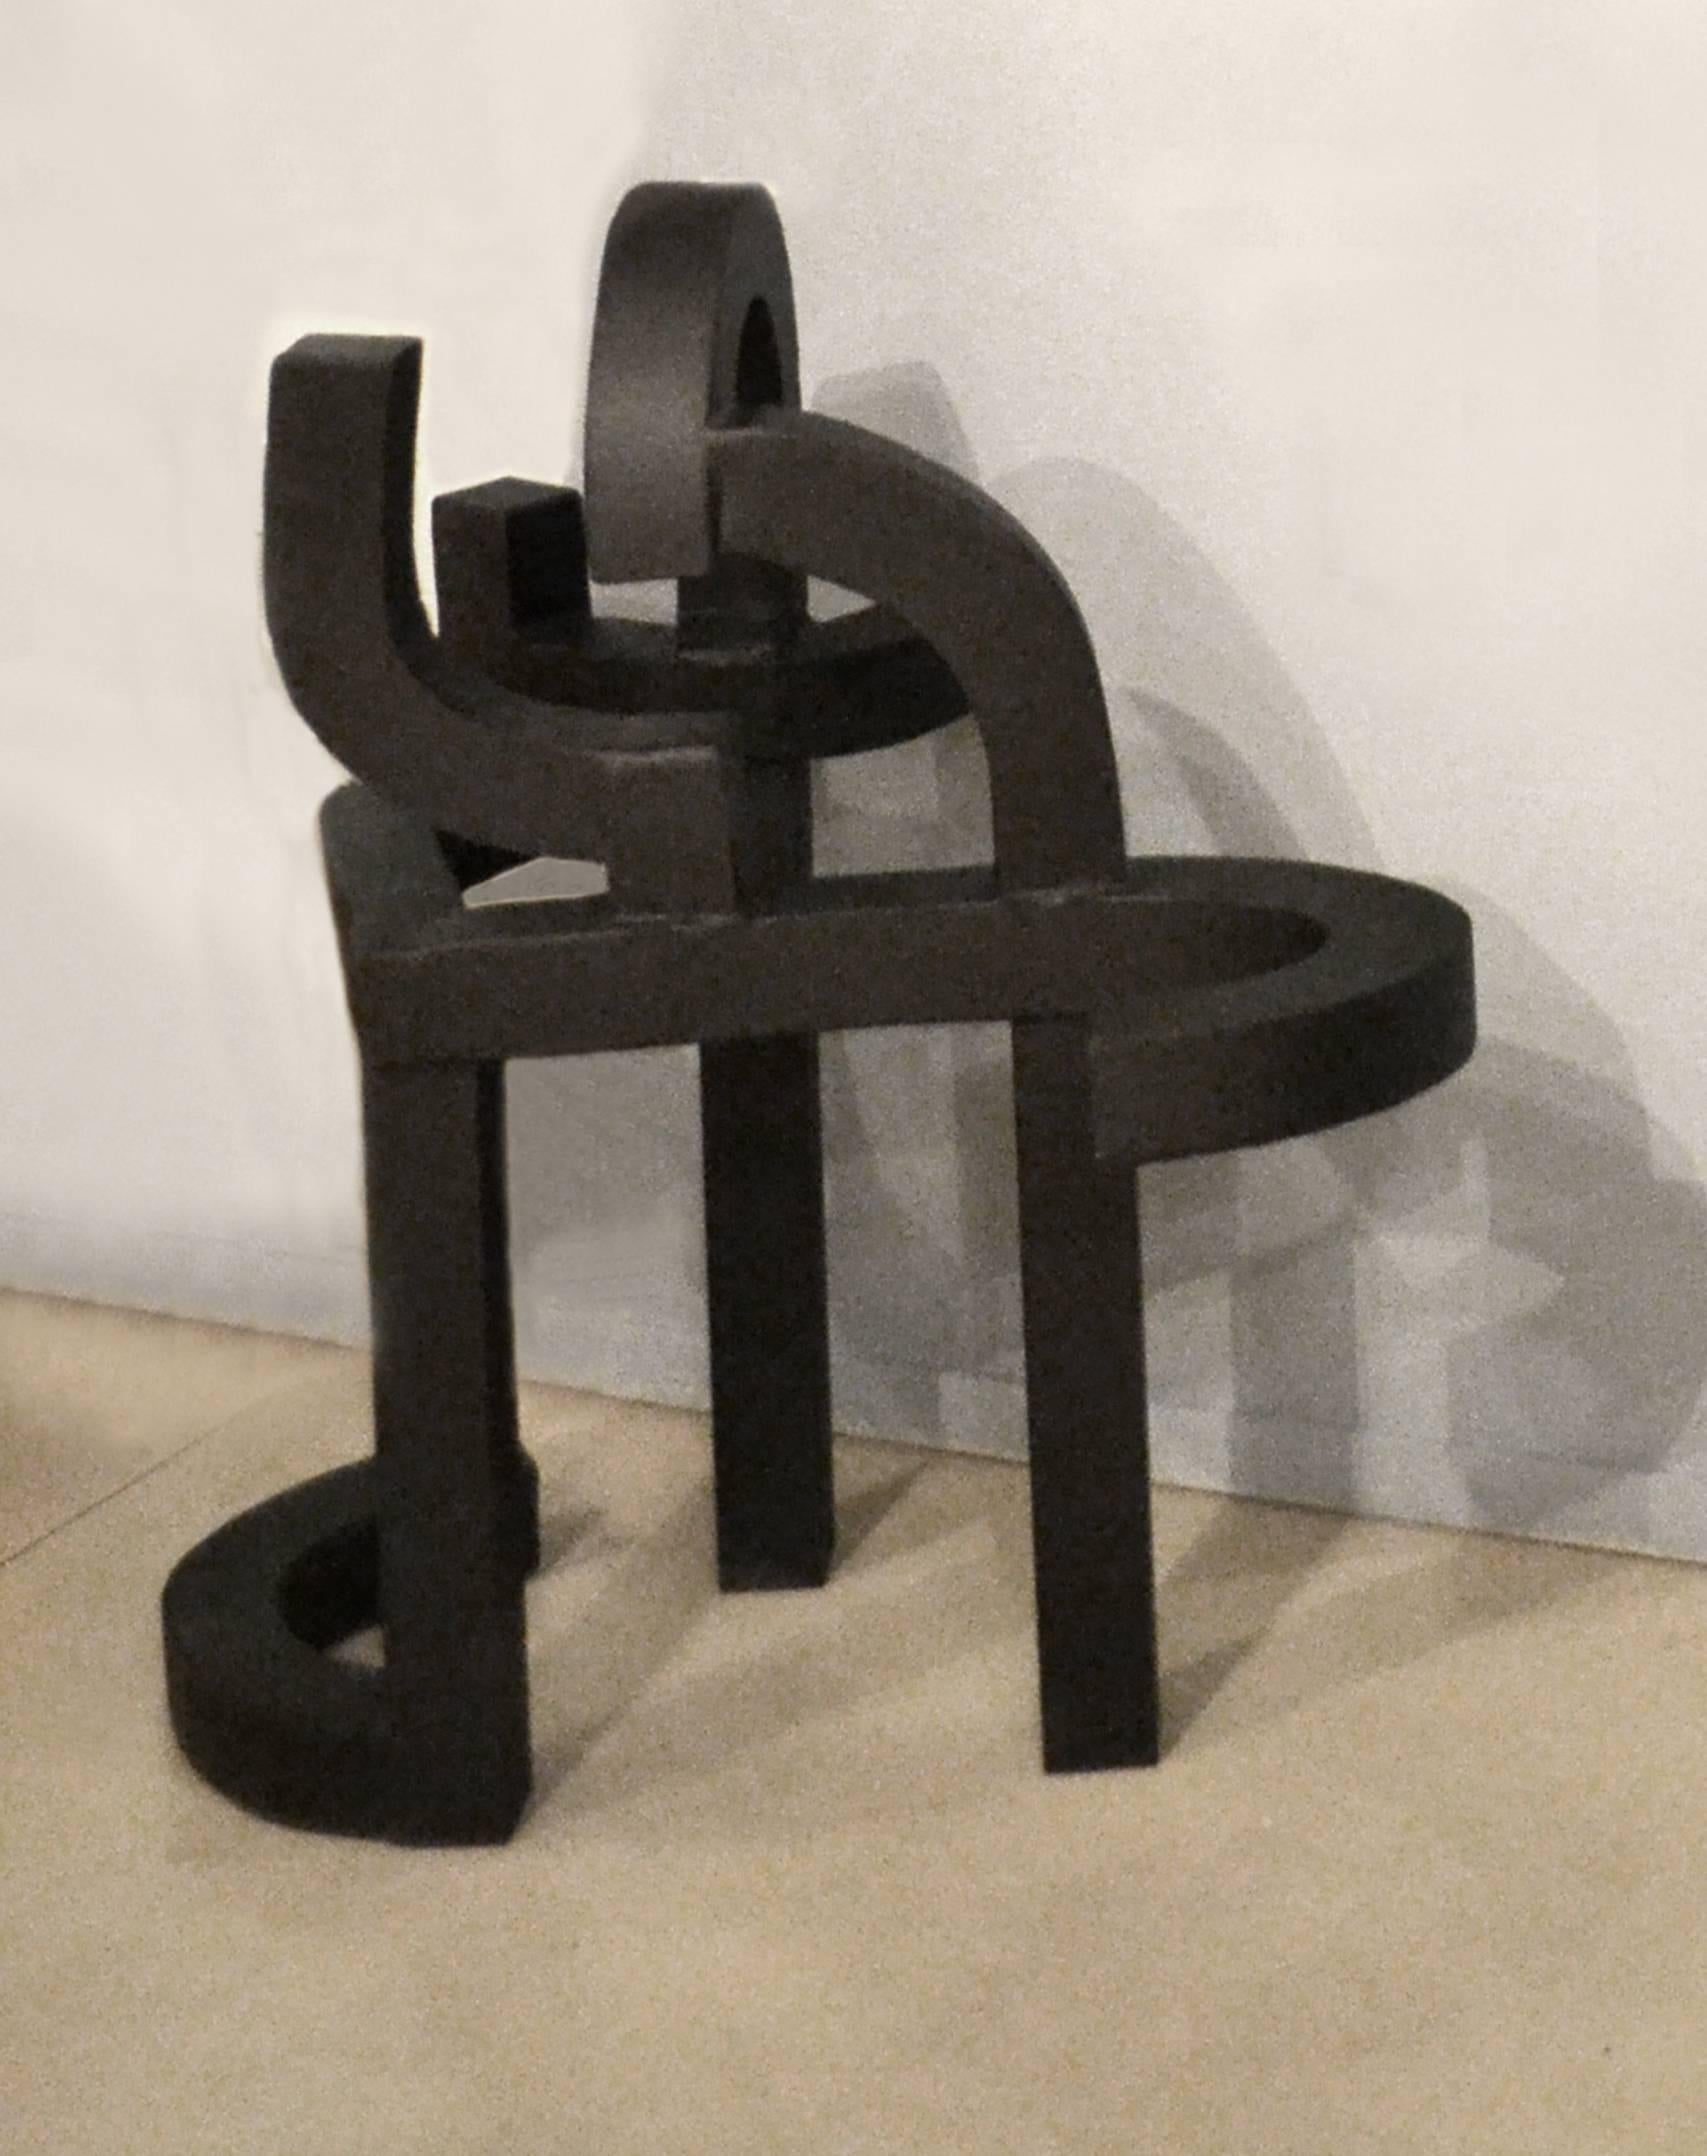 Artist Moira Fain continues to amassed a base of collectors and connoisseurs of her abstract steel sculptures. This steel sculpture was inspired by a larger than lifesize sculpture by famed artist and sculptor Eduardo Chillida. It is made up of